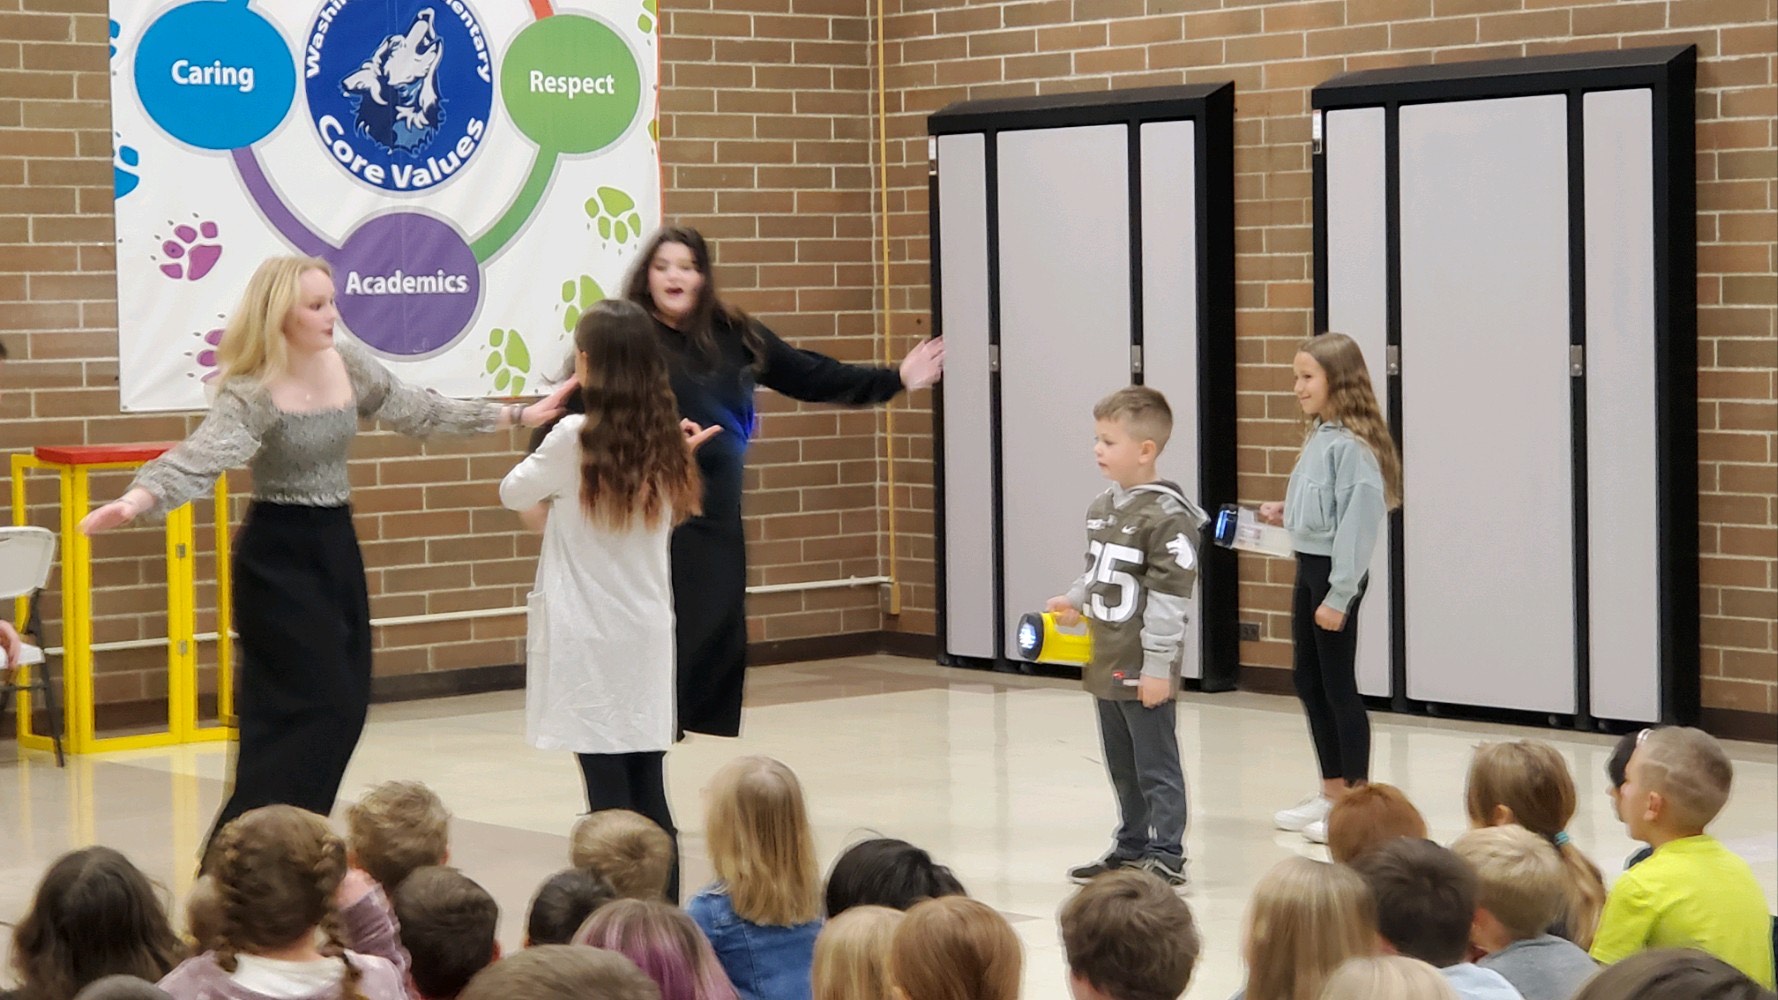 2 ISU students perform opera while one elementary student conducts with a music baton, and two shine lights on them